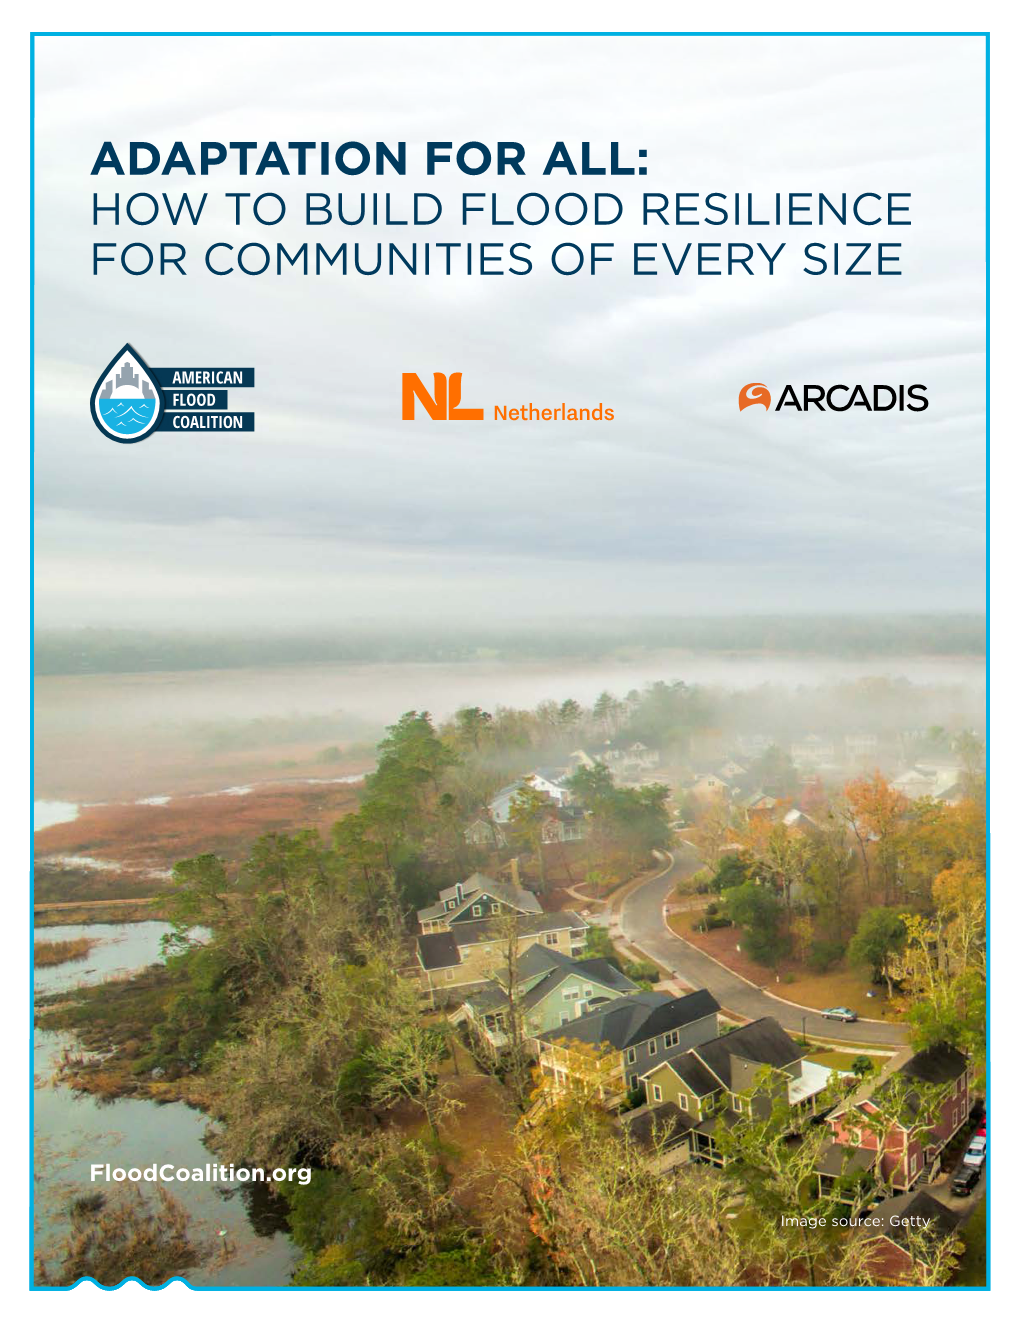 Adaptation for All: How to Build Flood Resilience for Communities of Every Size